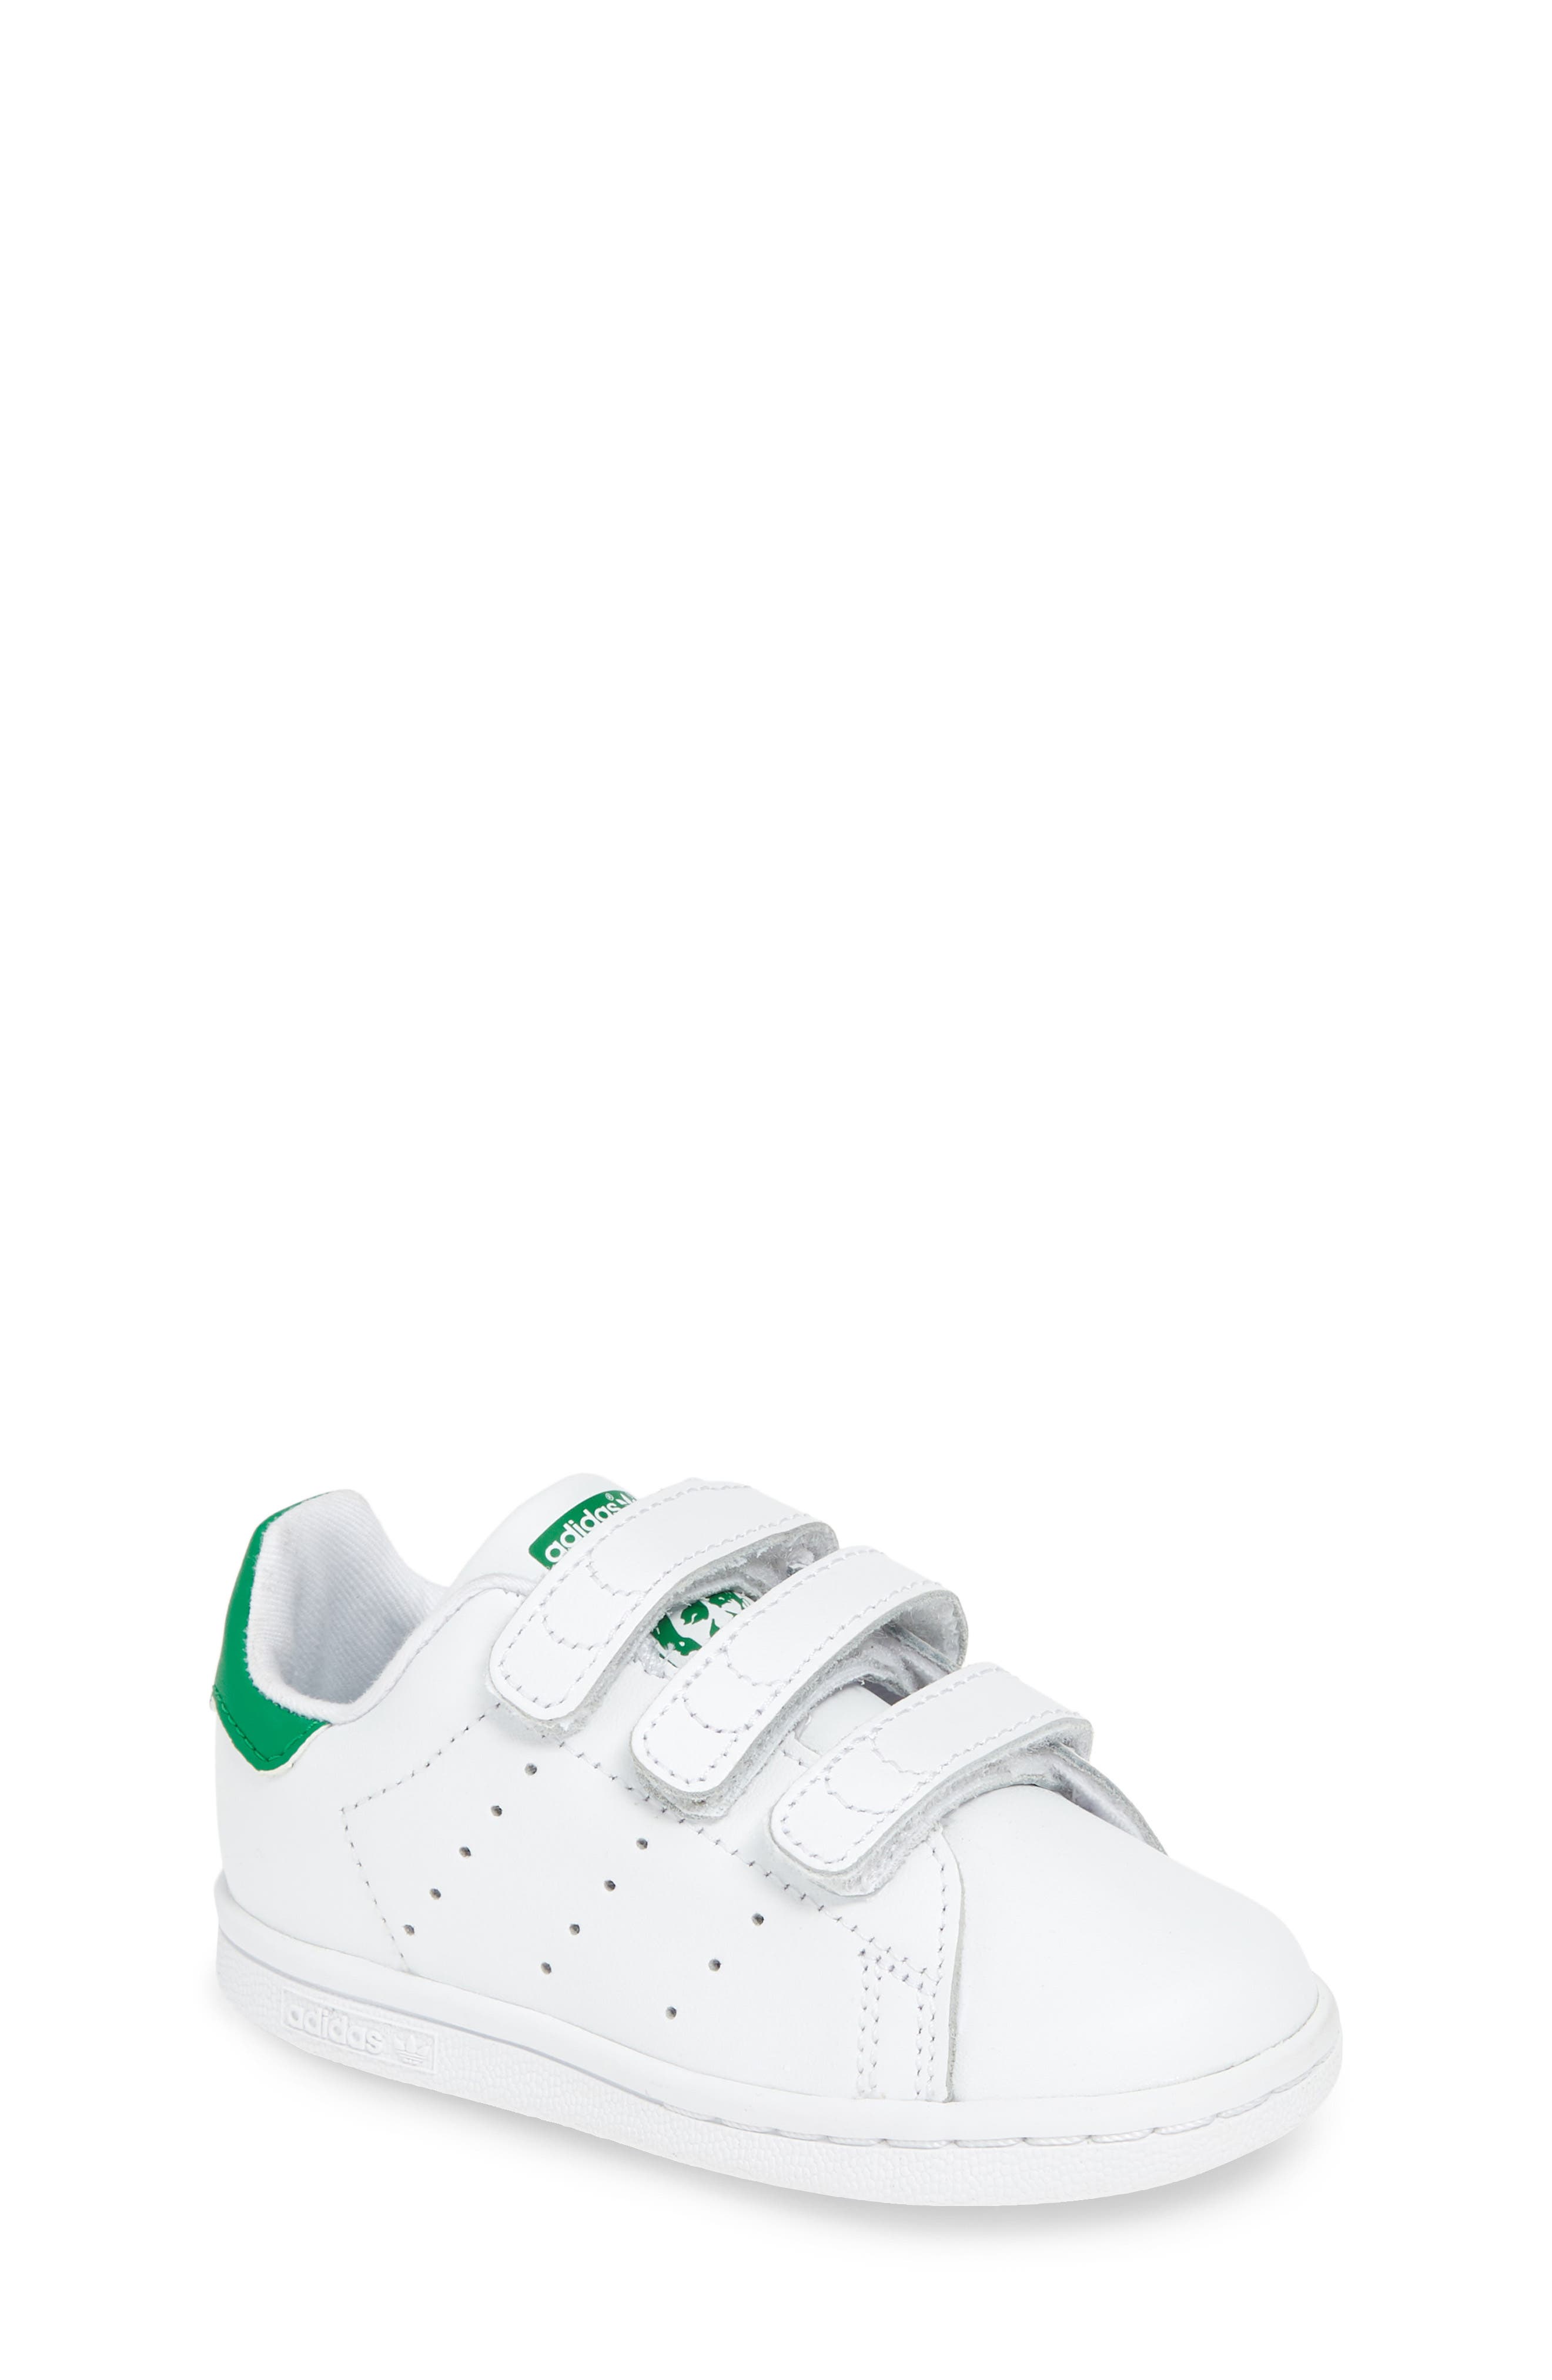 adidas baby tennis shoes